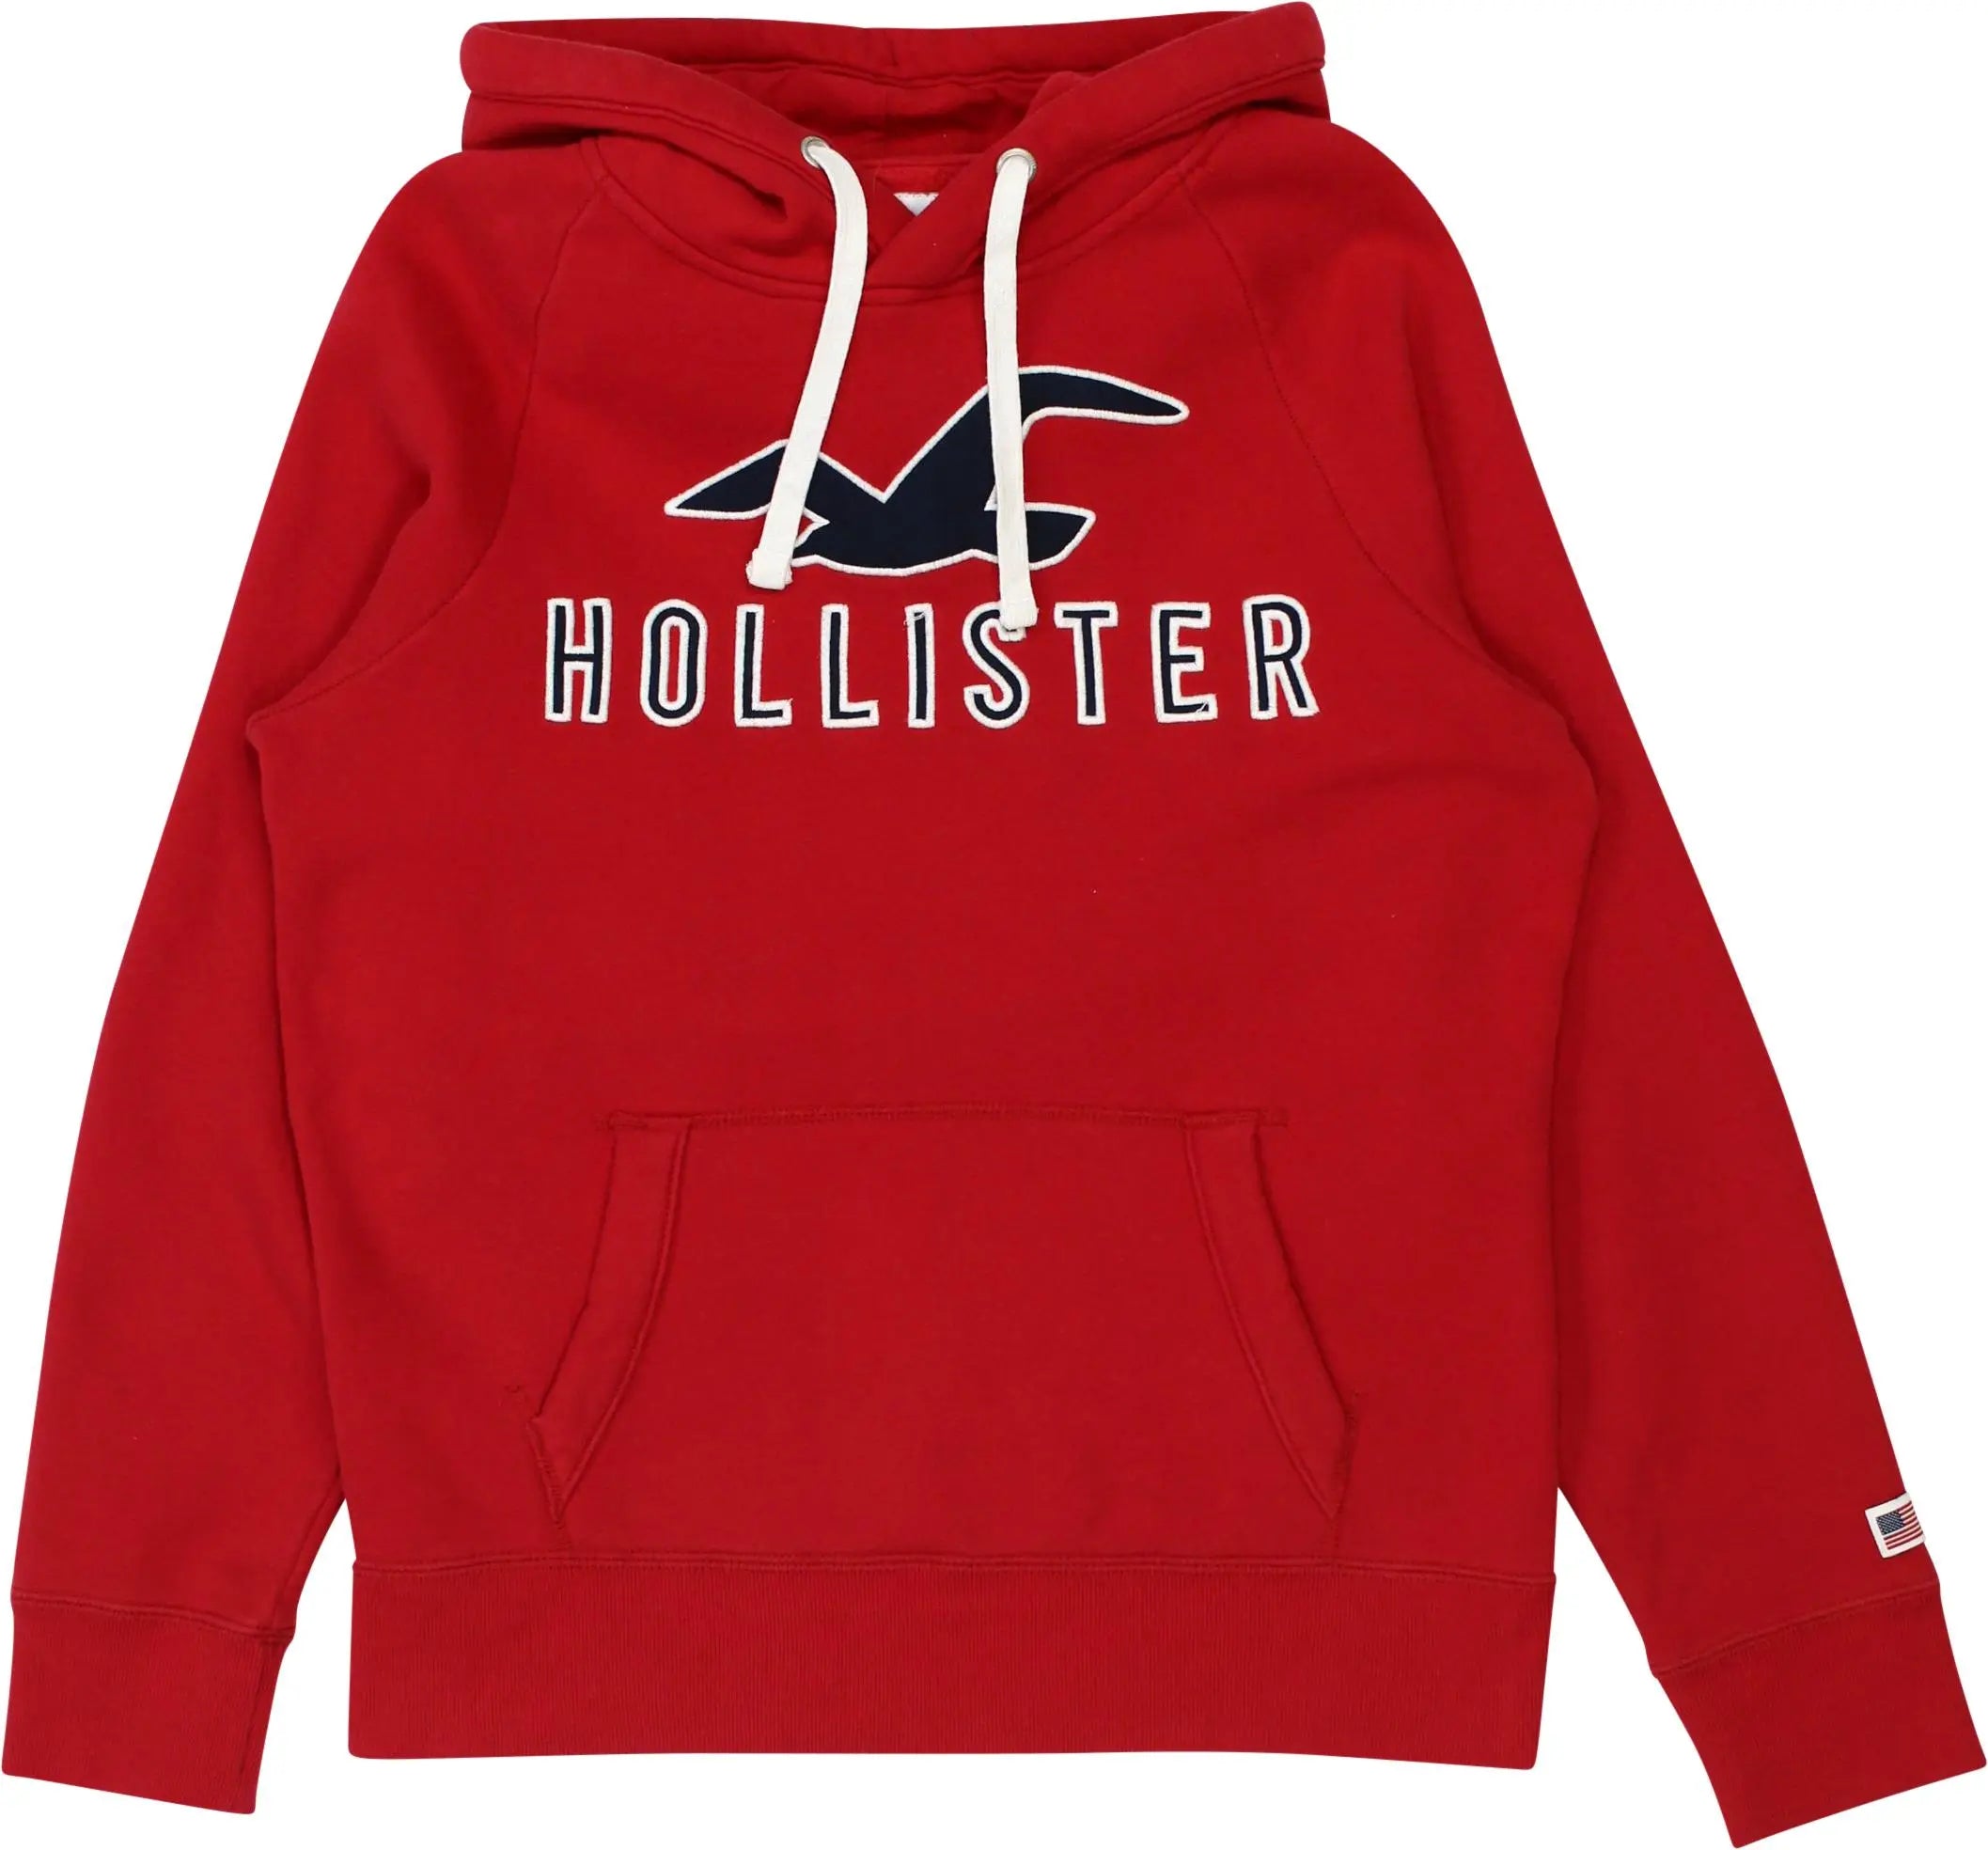 Holister - Red Hoodie by Hollister- ThriftTale.com - Vintage and second handclothing